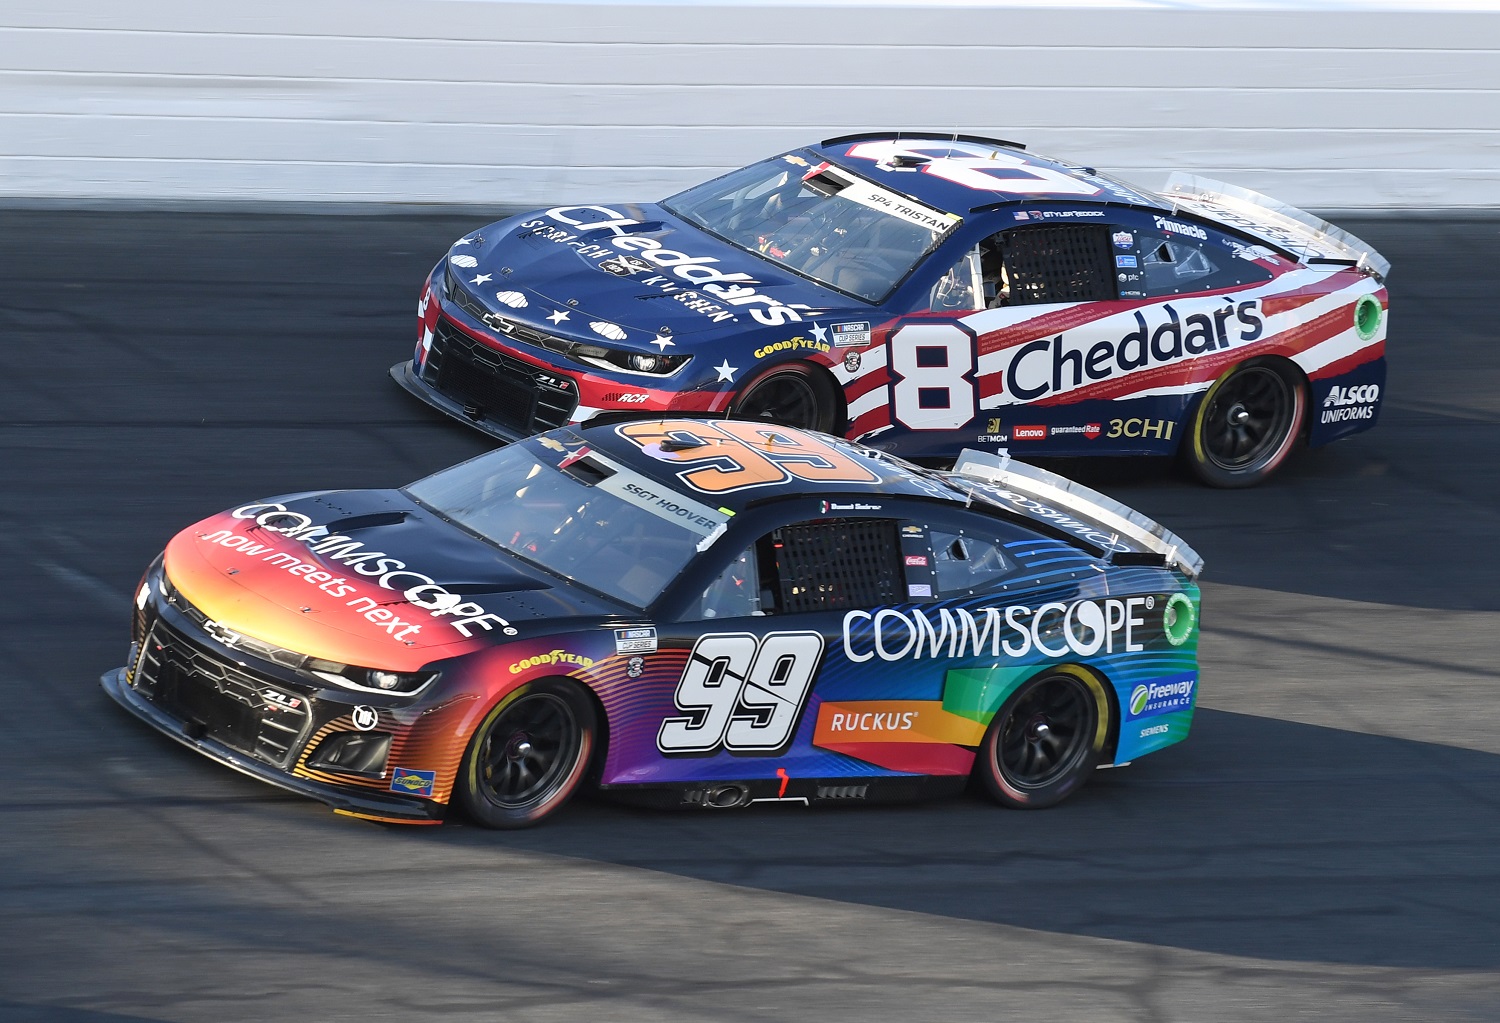 Daniel Suarez and Tyler Reddick race through Turn 4 during the running of the NASCAR Cup Series Coca-Cola 600 on May 29, 2022, at Charlotte Motor Speedway.